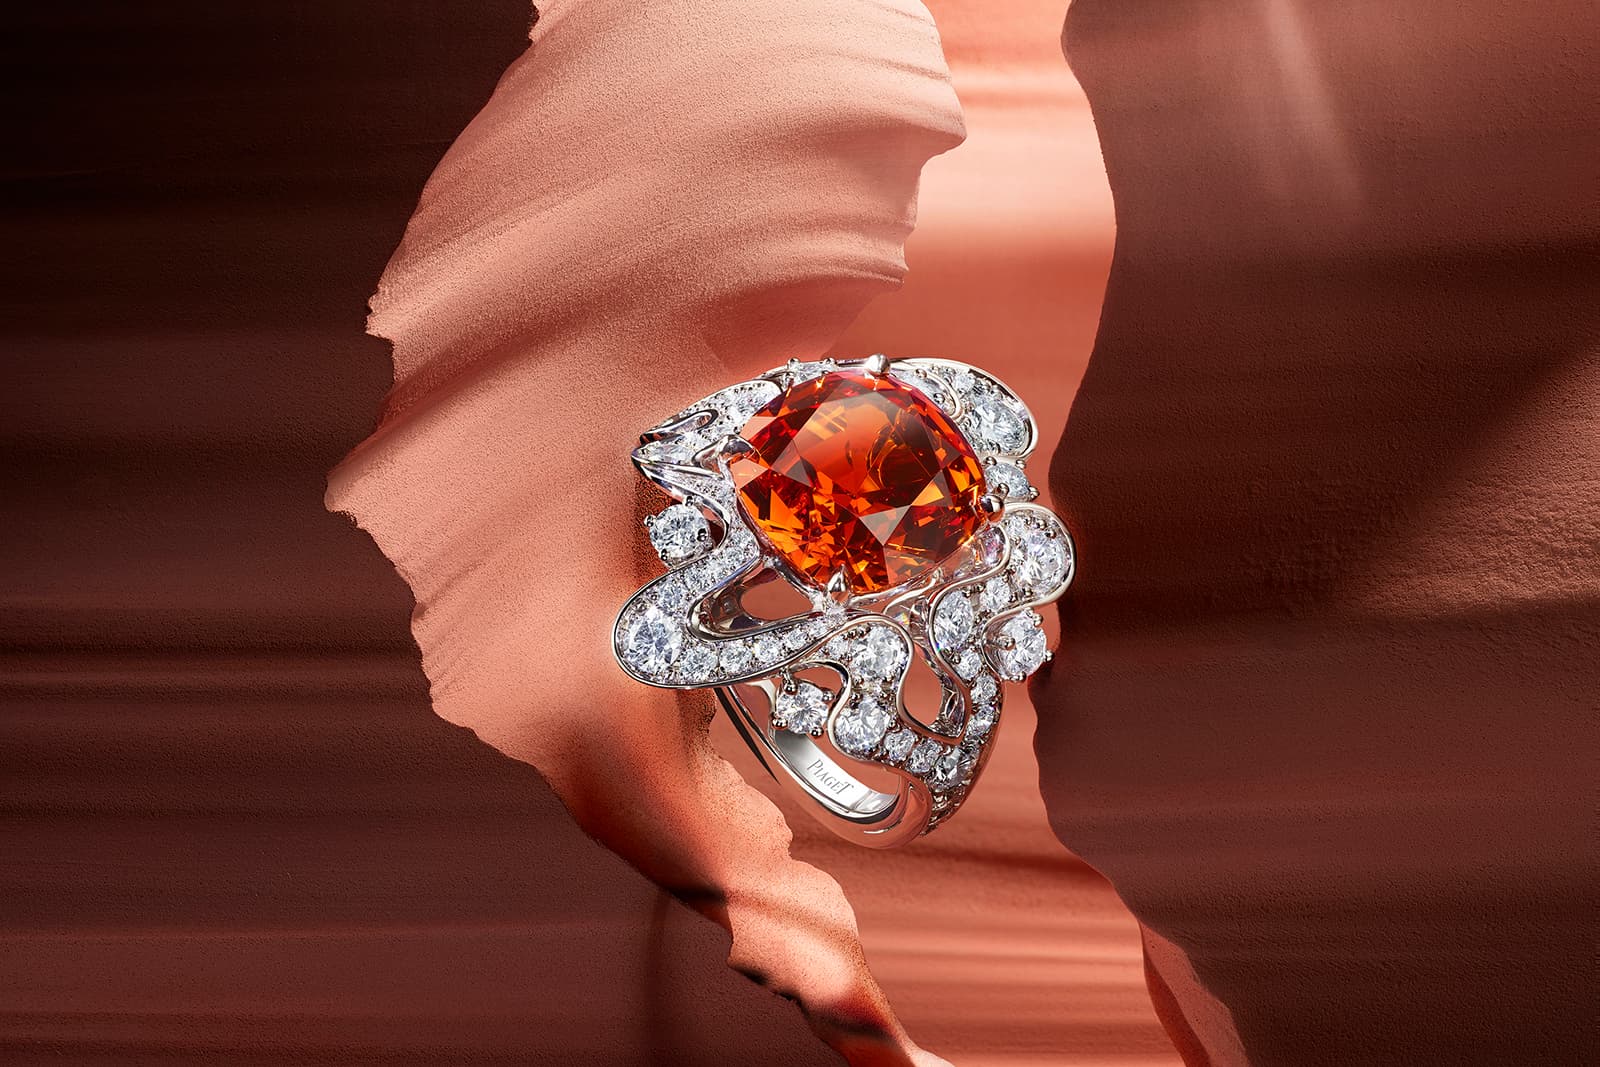 Piaget 'Irresistible Attraction' ring with spessartite garnet and diamonds in white gold